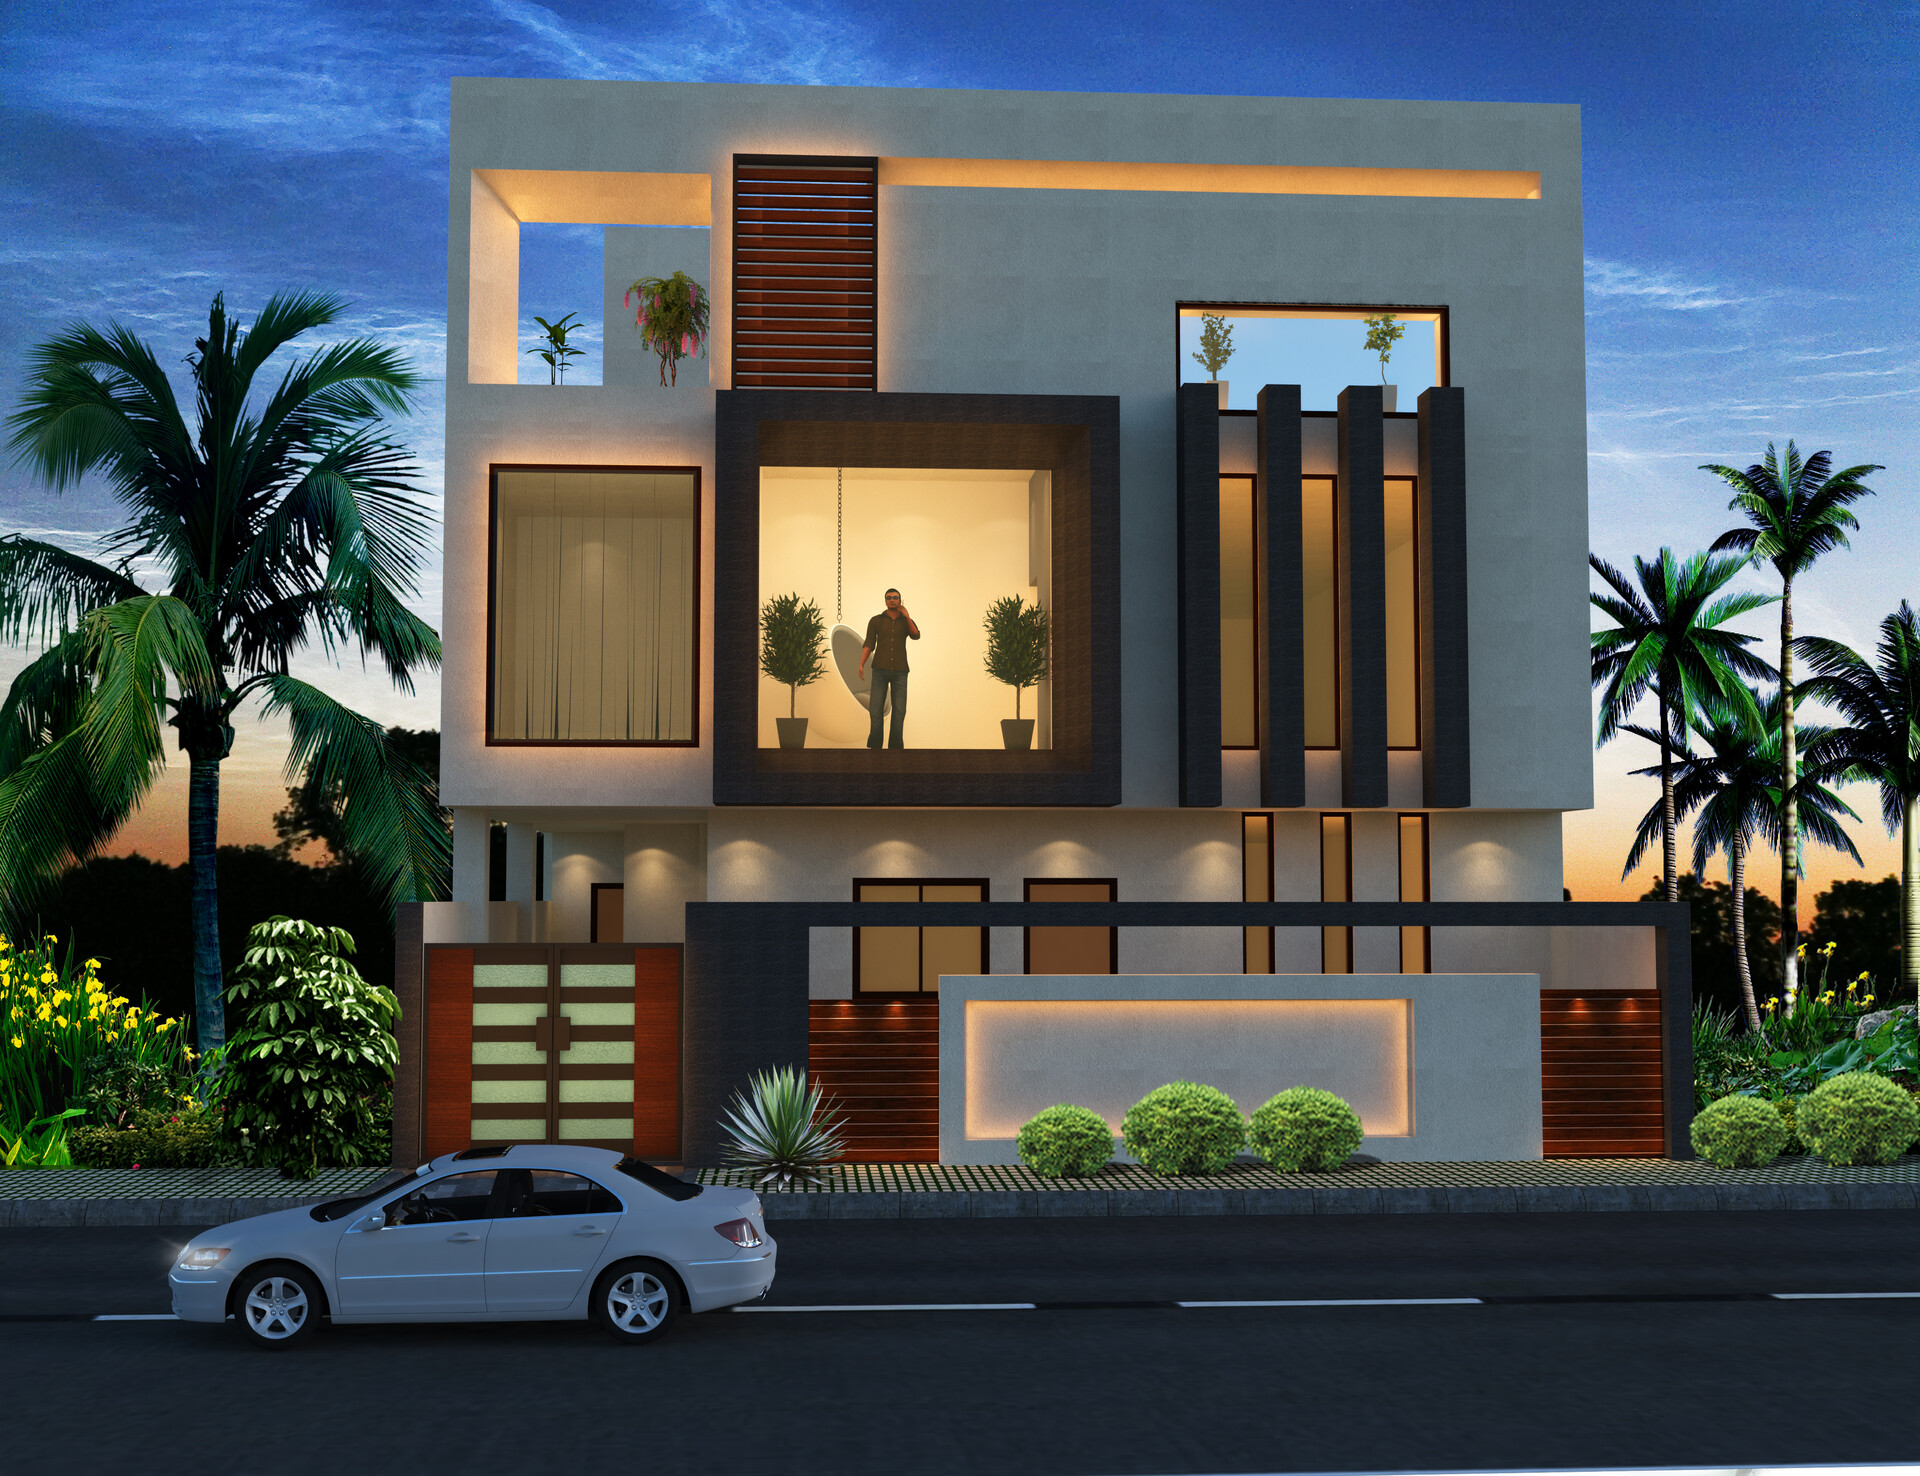 shubham chaturvedi - 3D house exterior view